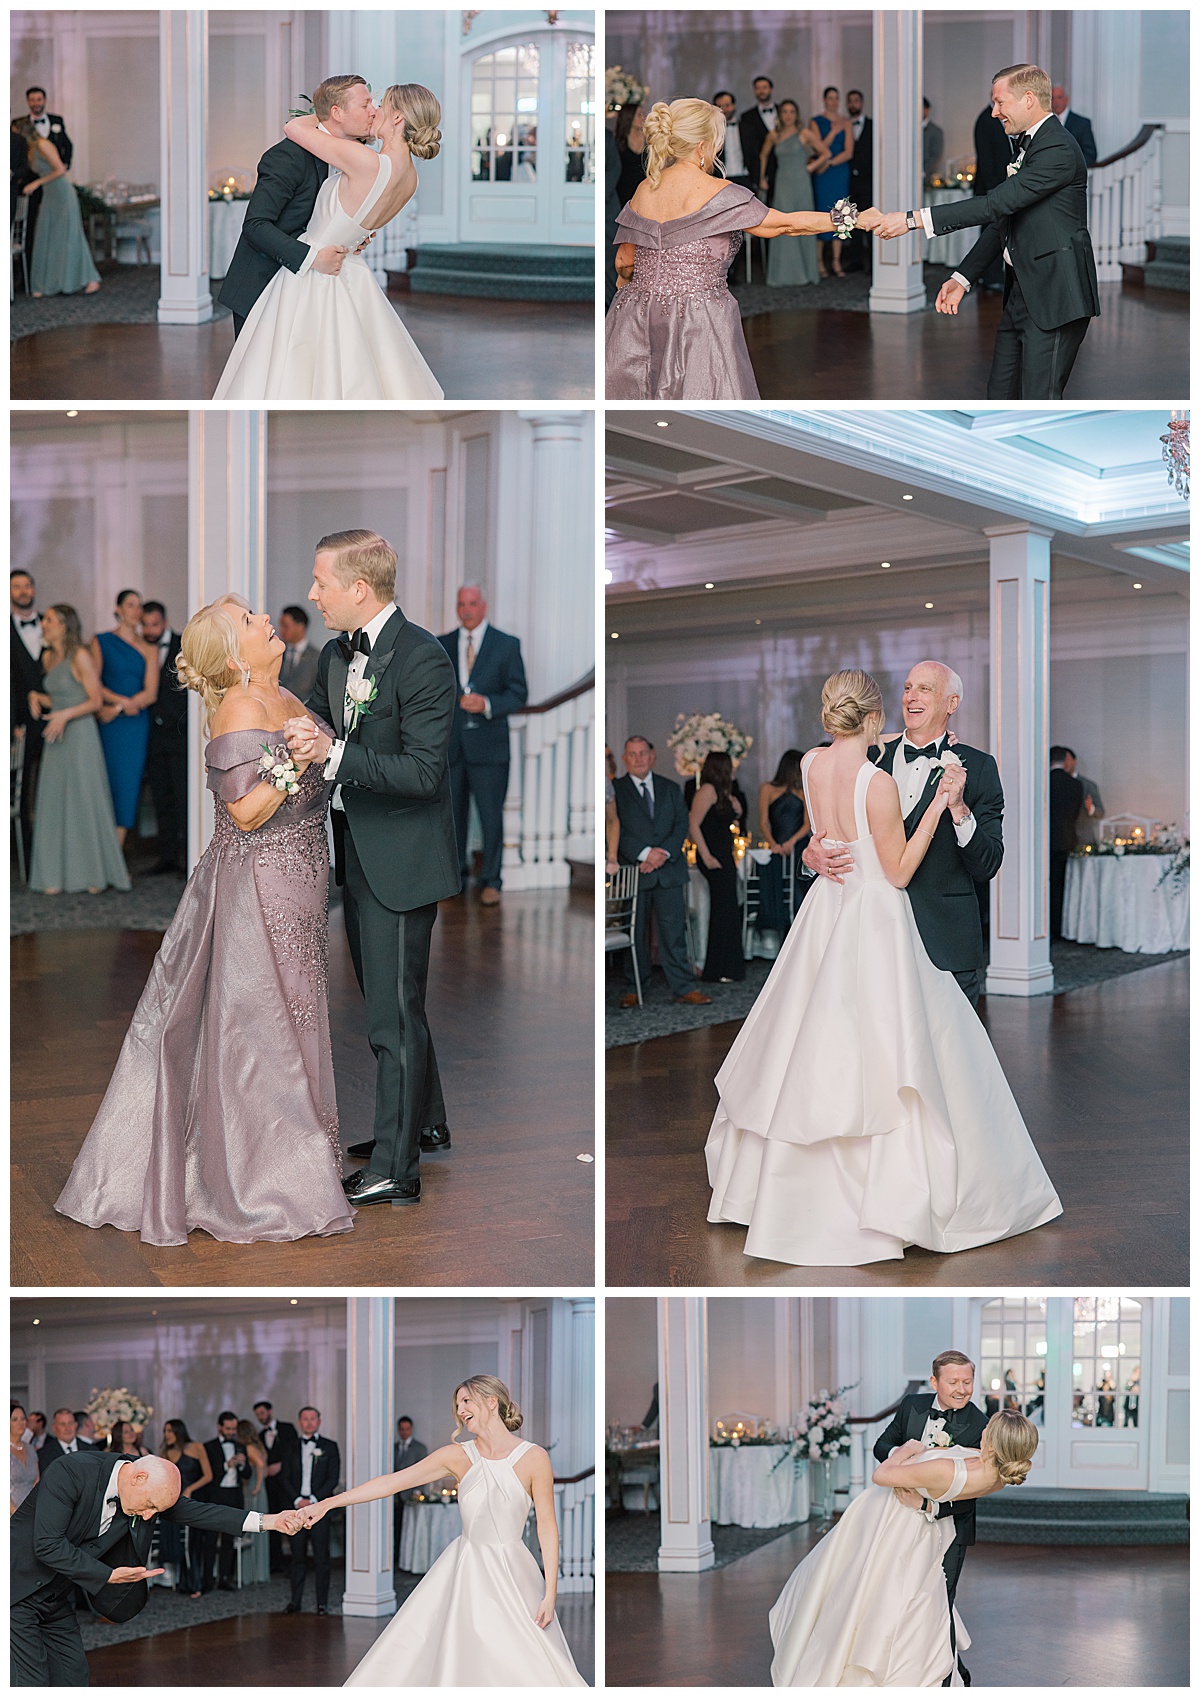 Bride shares her first dance with her groom and her dad and the groom dances with his mom at The Mill Lakeside Manor. 